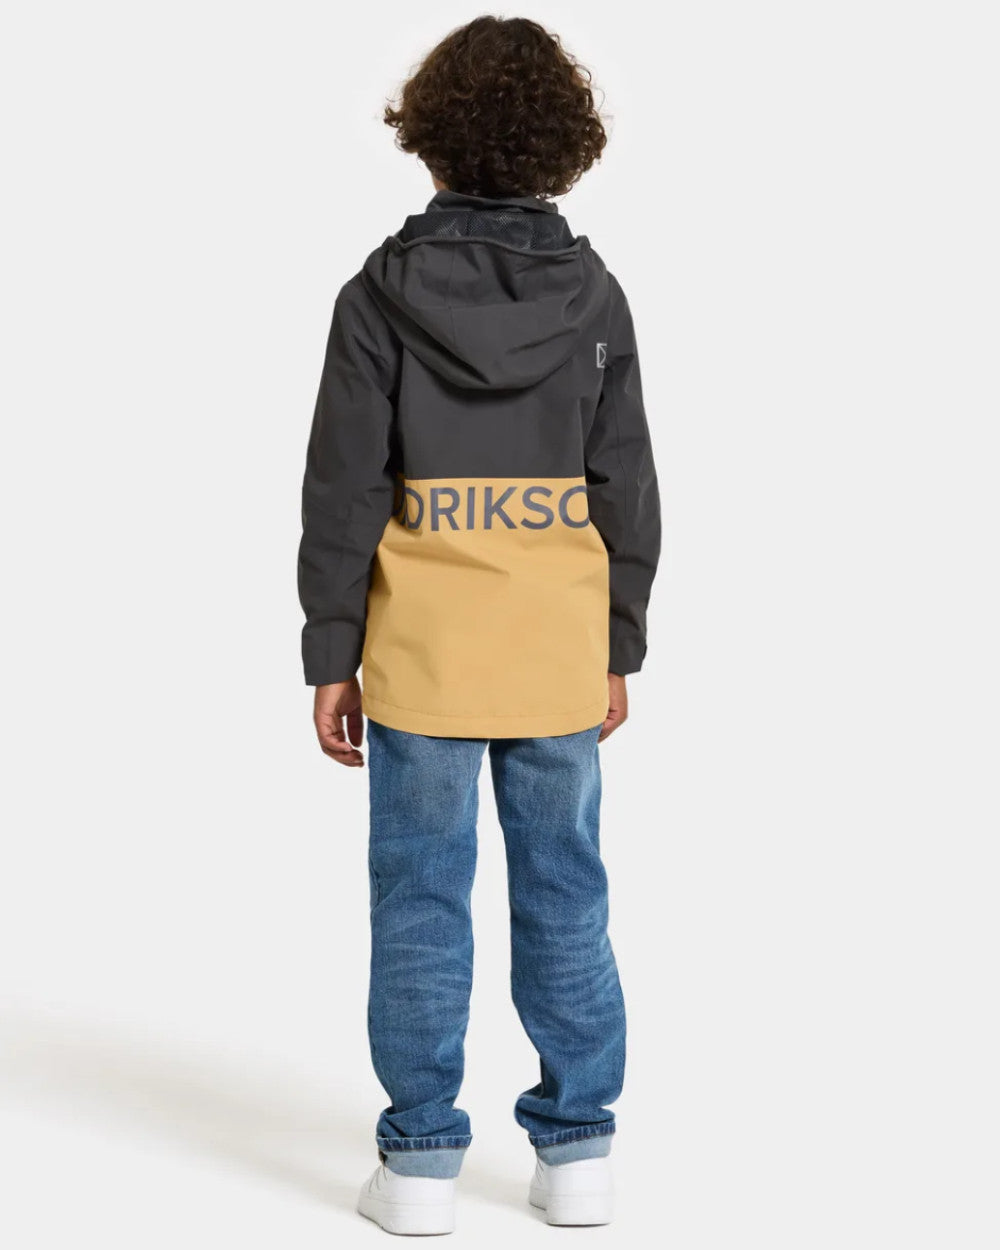 Sanstorm Coloured Didriksons Piko Childrens Jacket On A Grey Background 